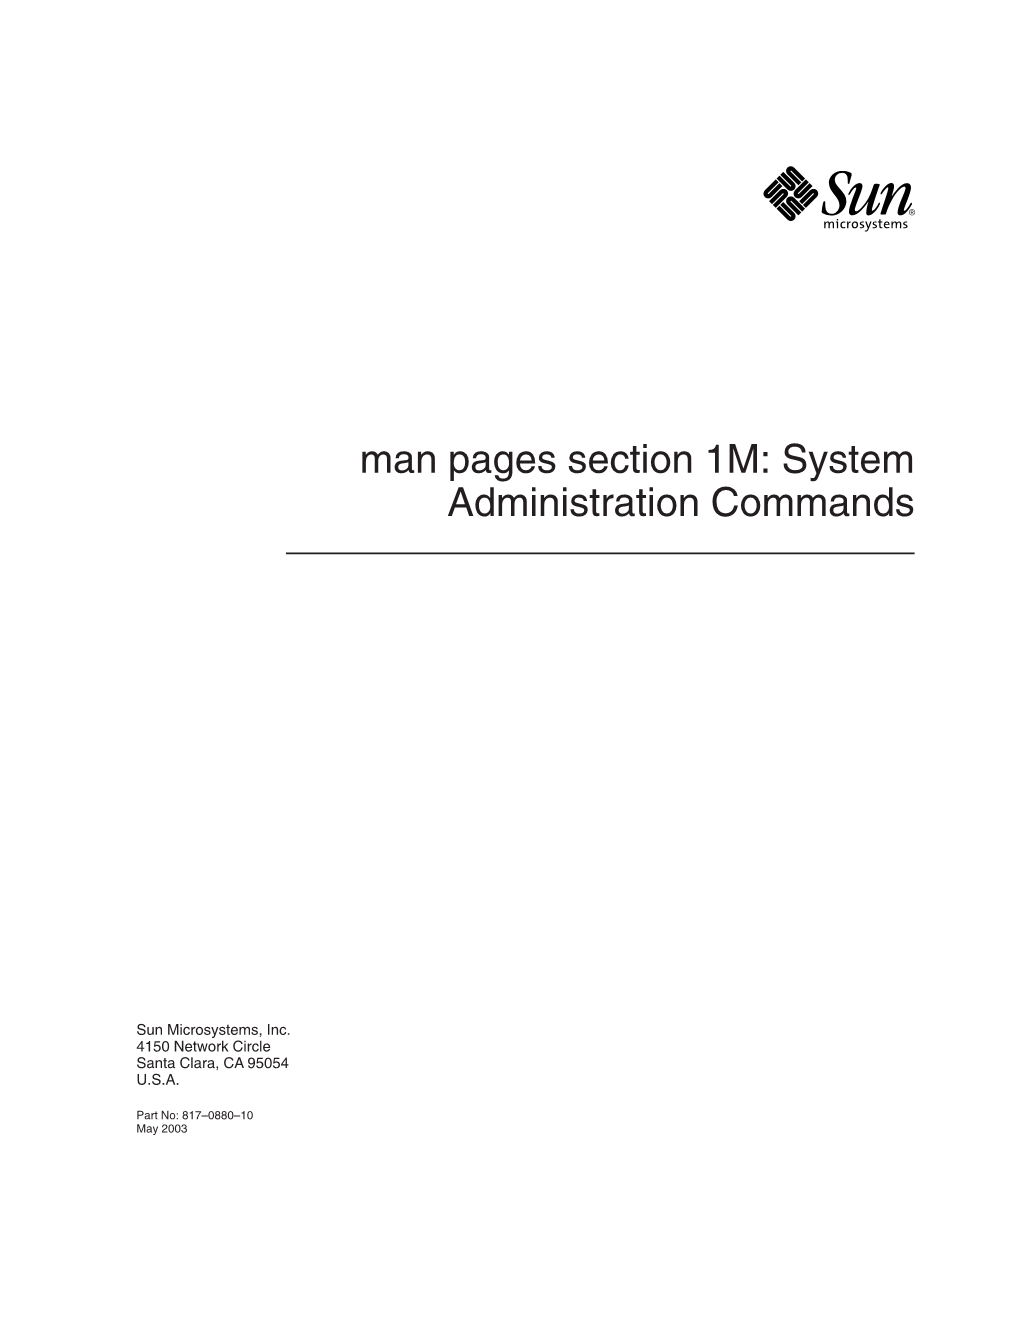 System Administration Commands